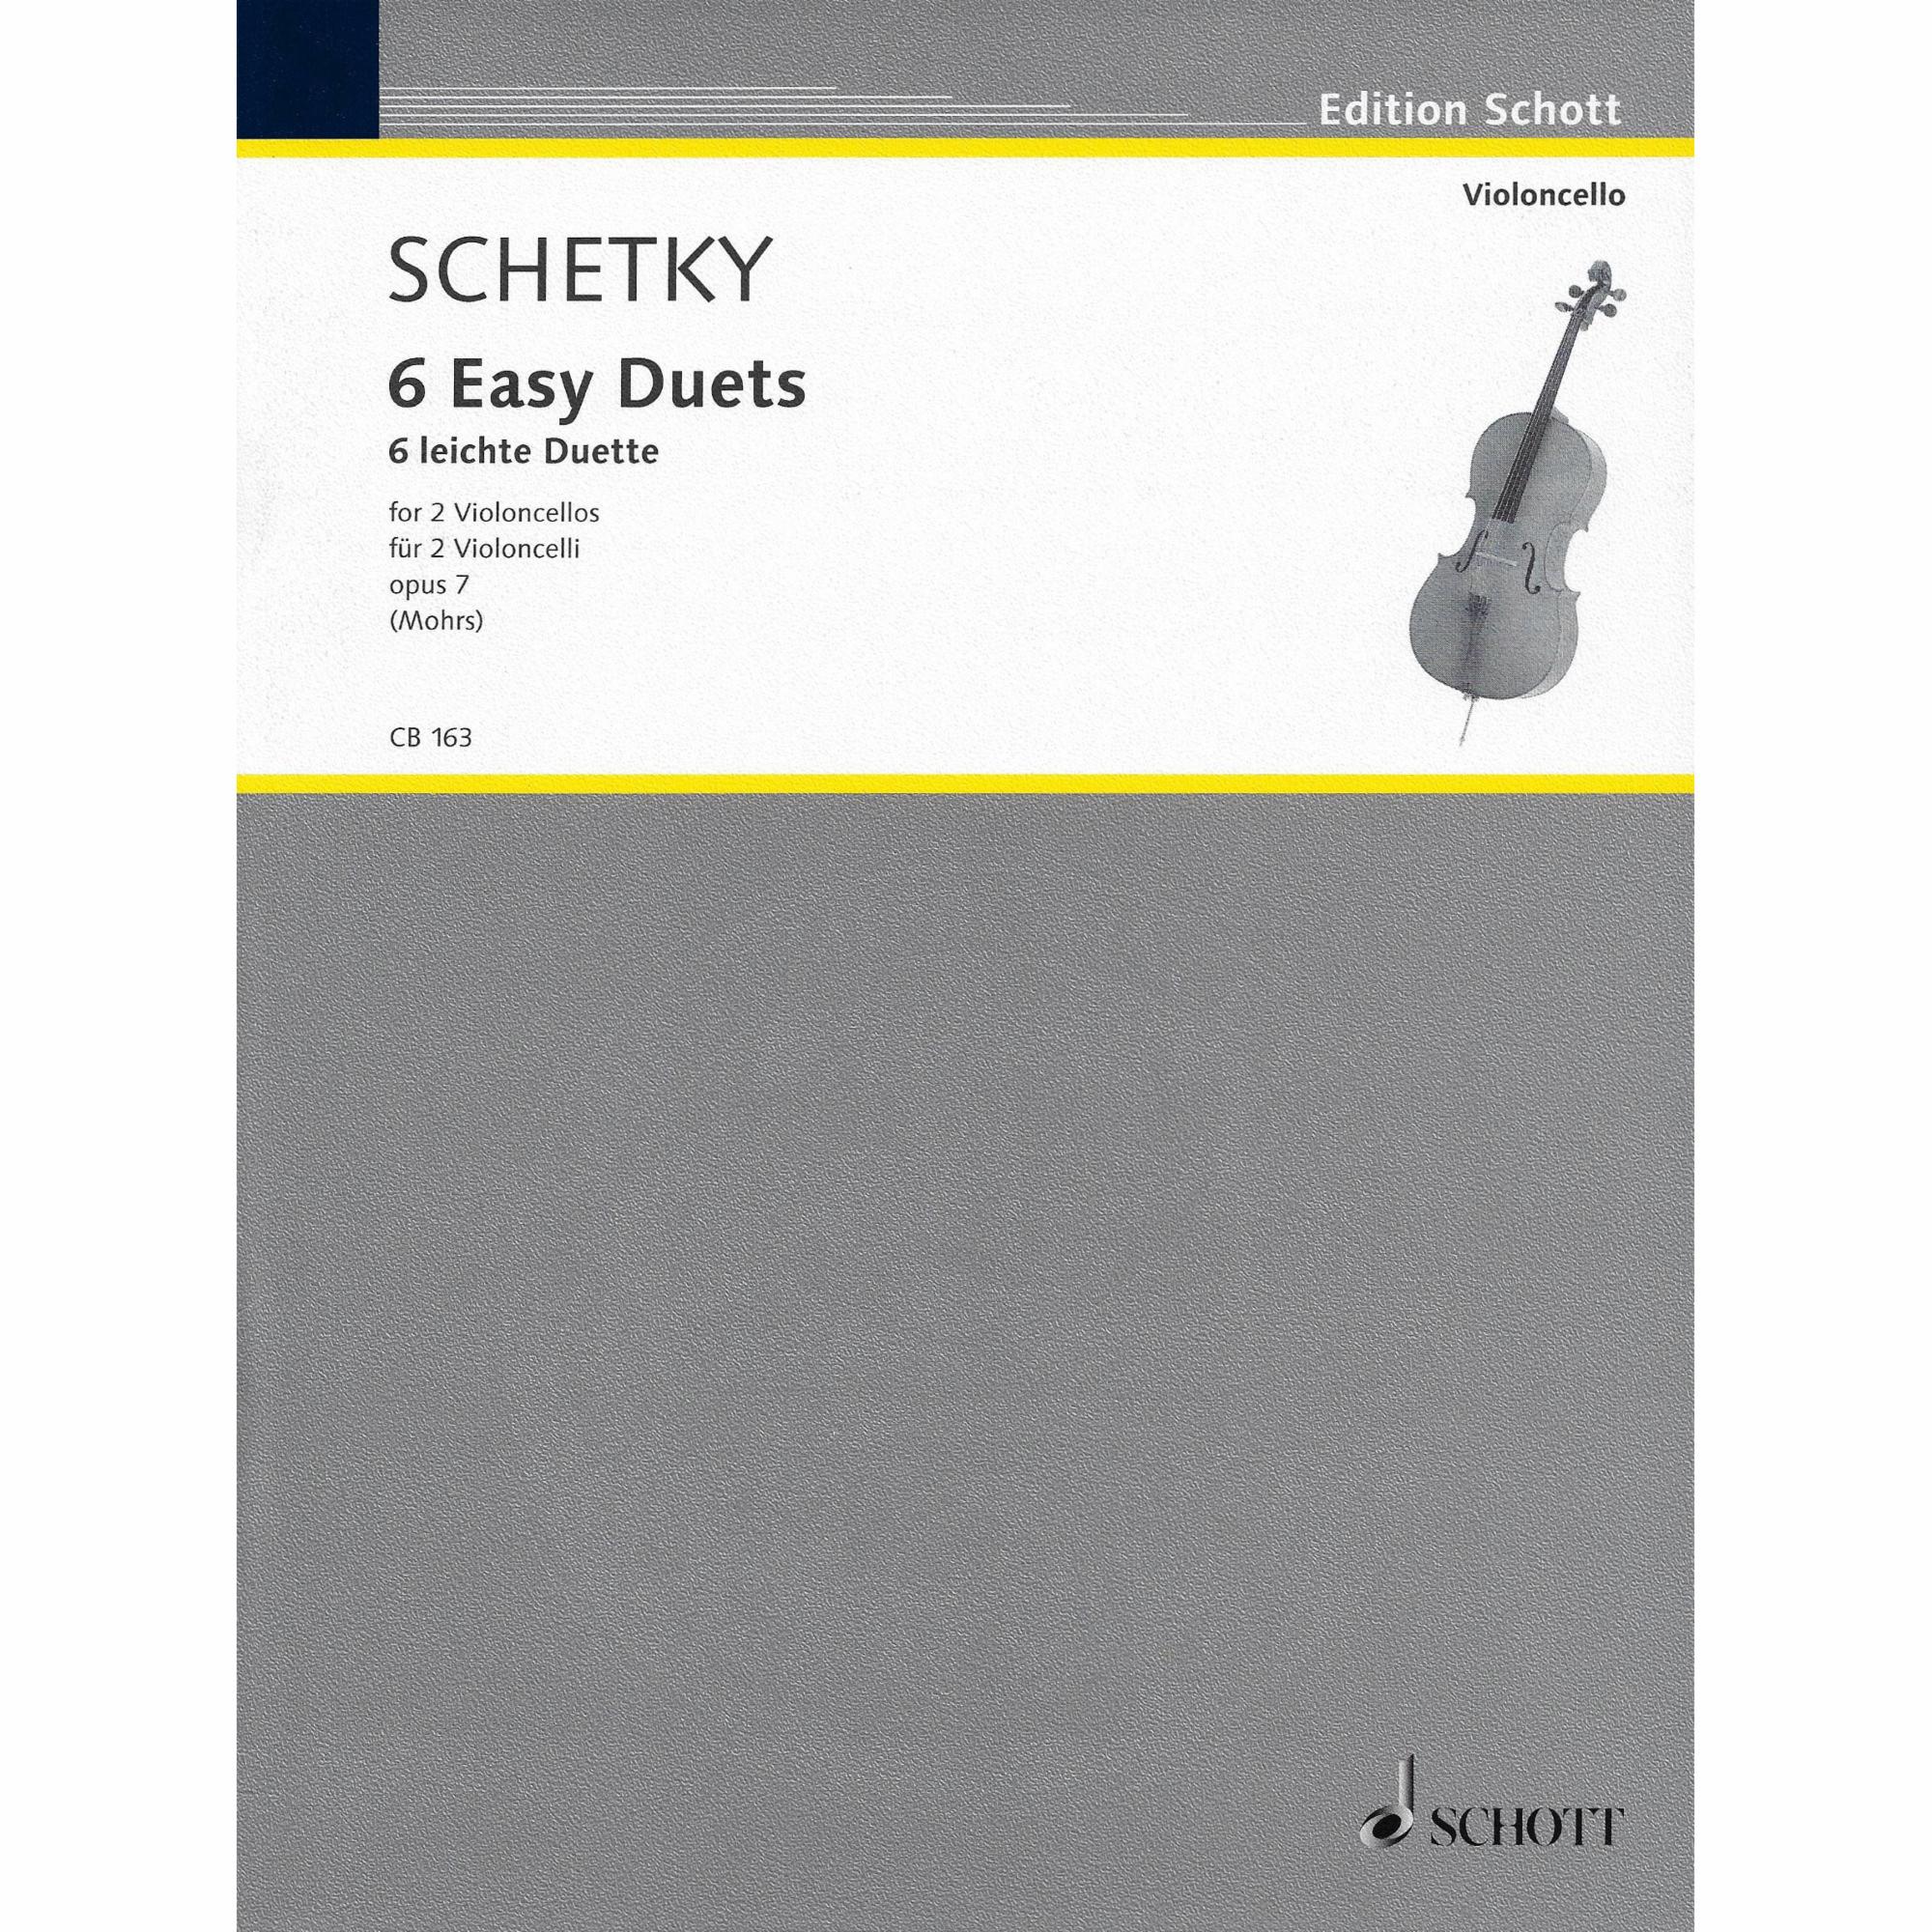 Schetky -- 6 Easy Duets, Op. 7 for Two Cellos